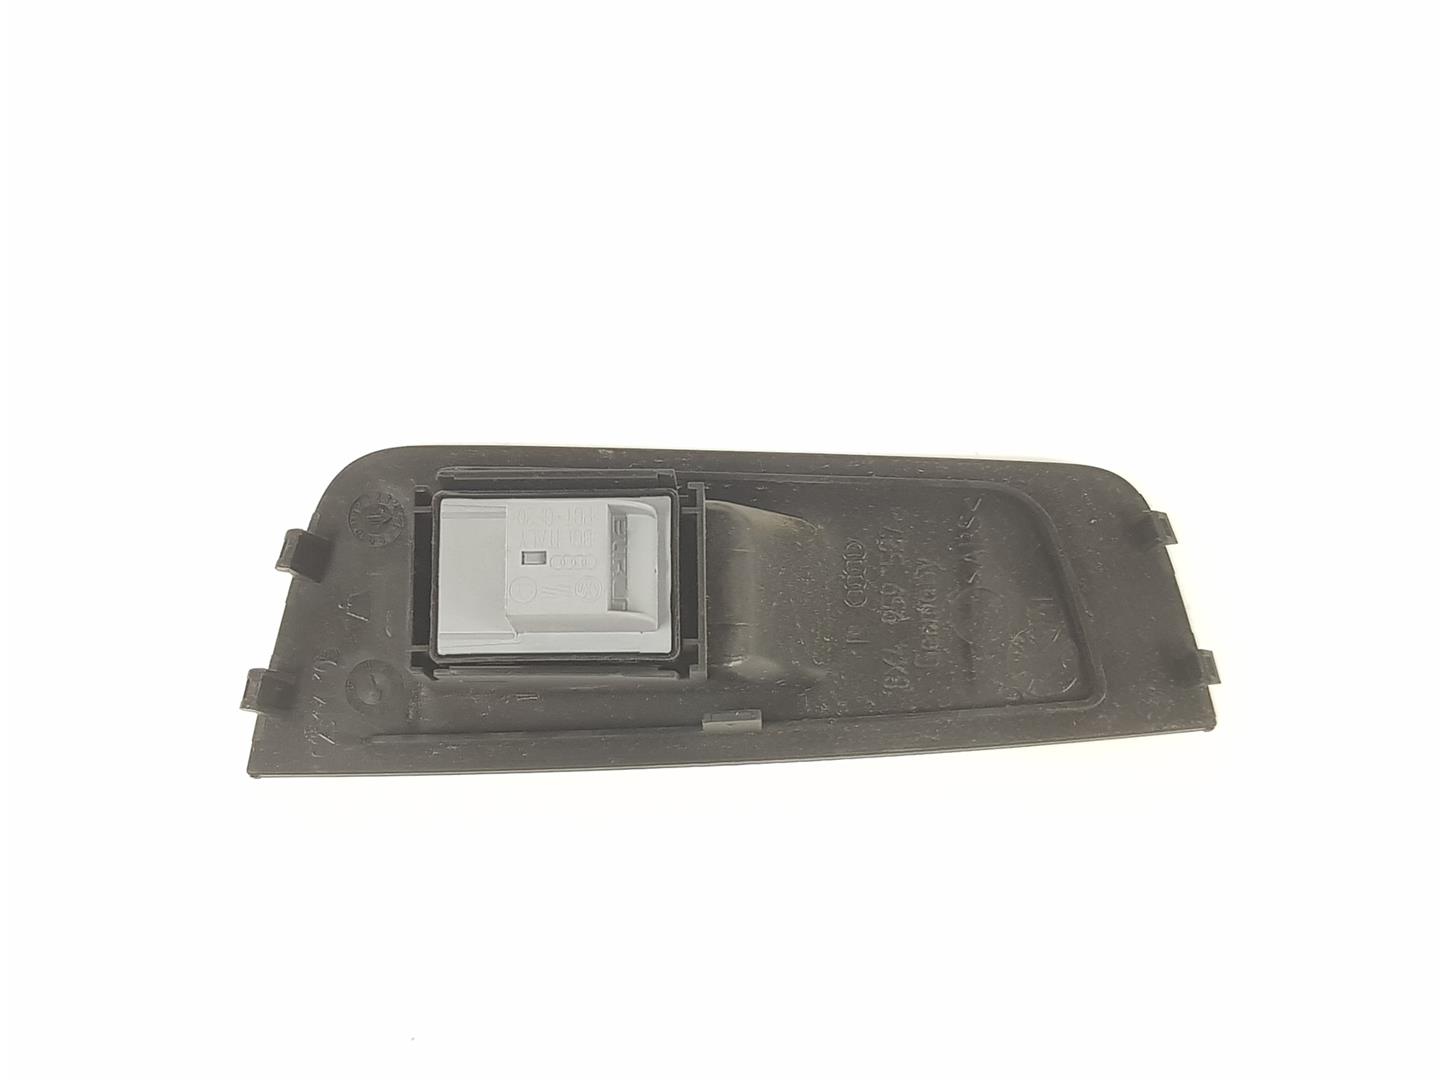 AUDI A7 C7/4G (2010-2020) Rear Right Door Window Control Switch 4H0959855A, 4H0959855A 19779221